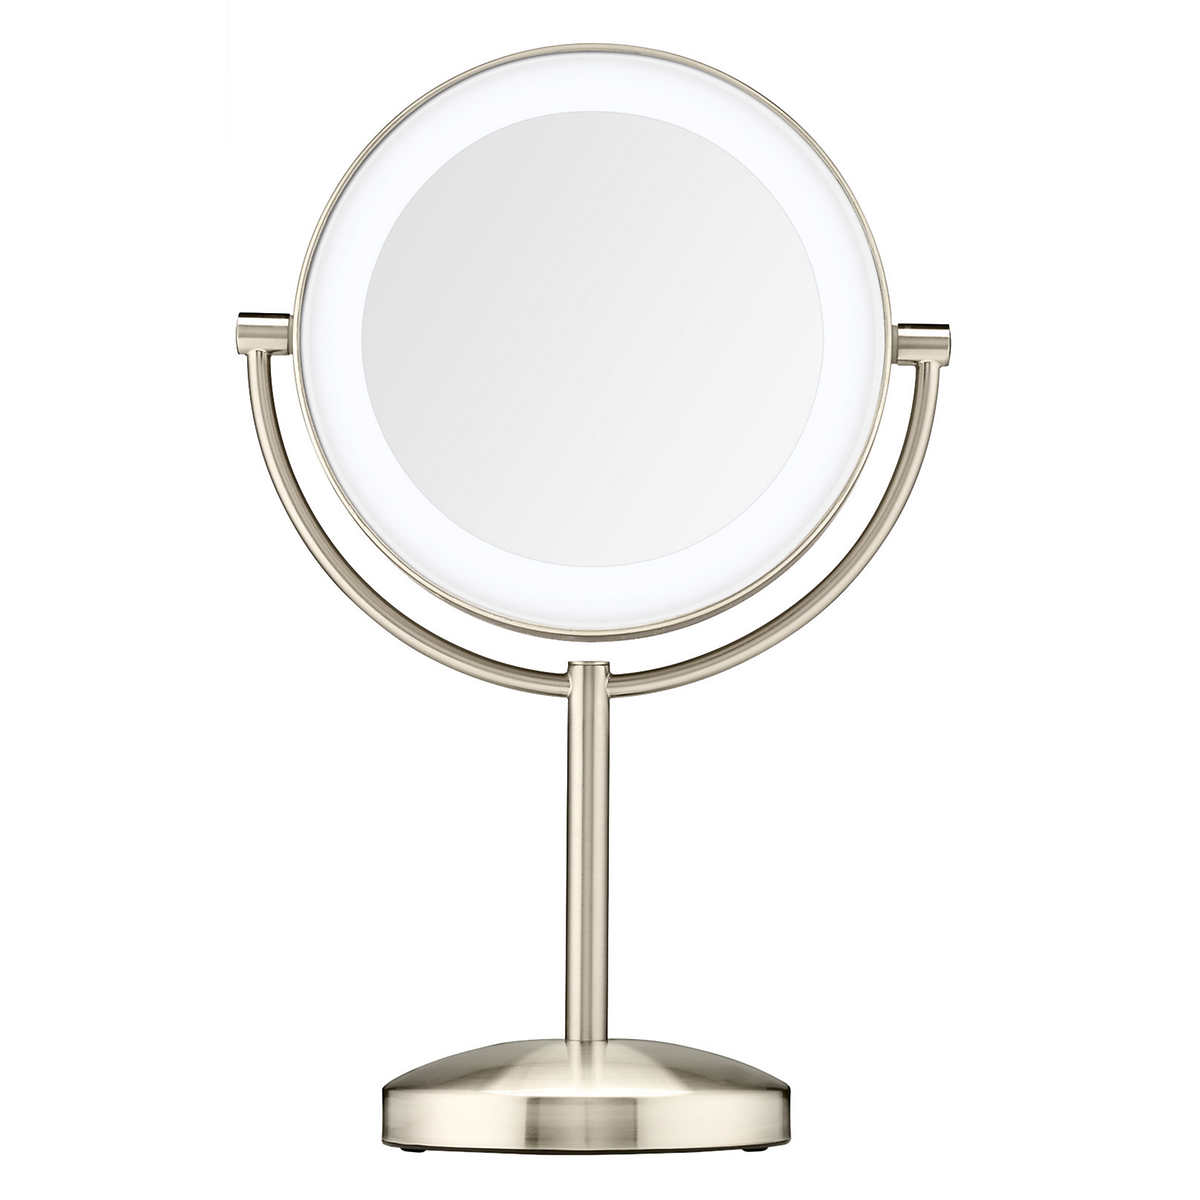 Reflections Led Lighted Mirror By, Led Vanity Mirror Canada